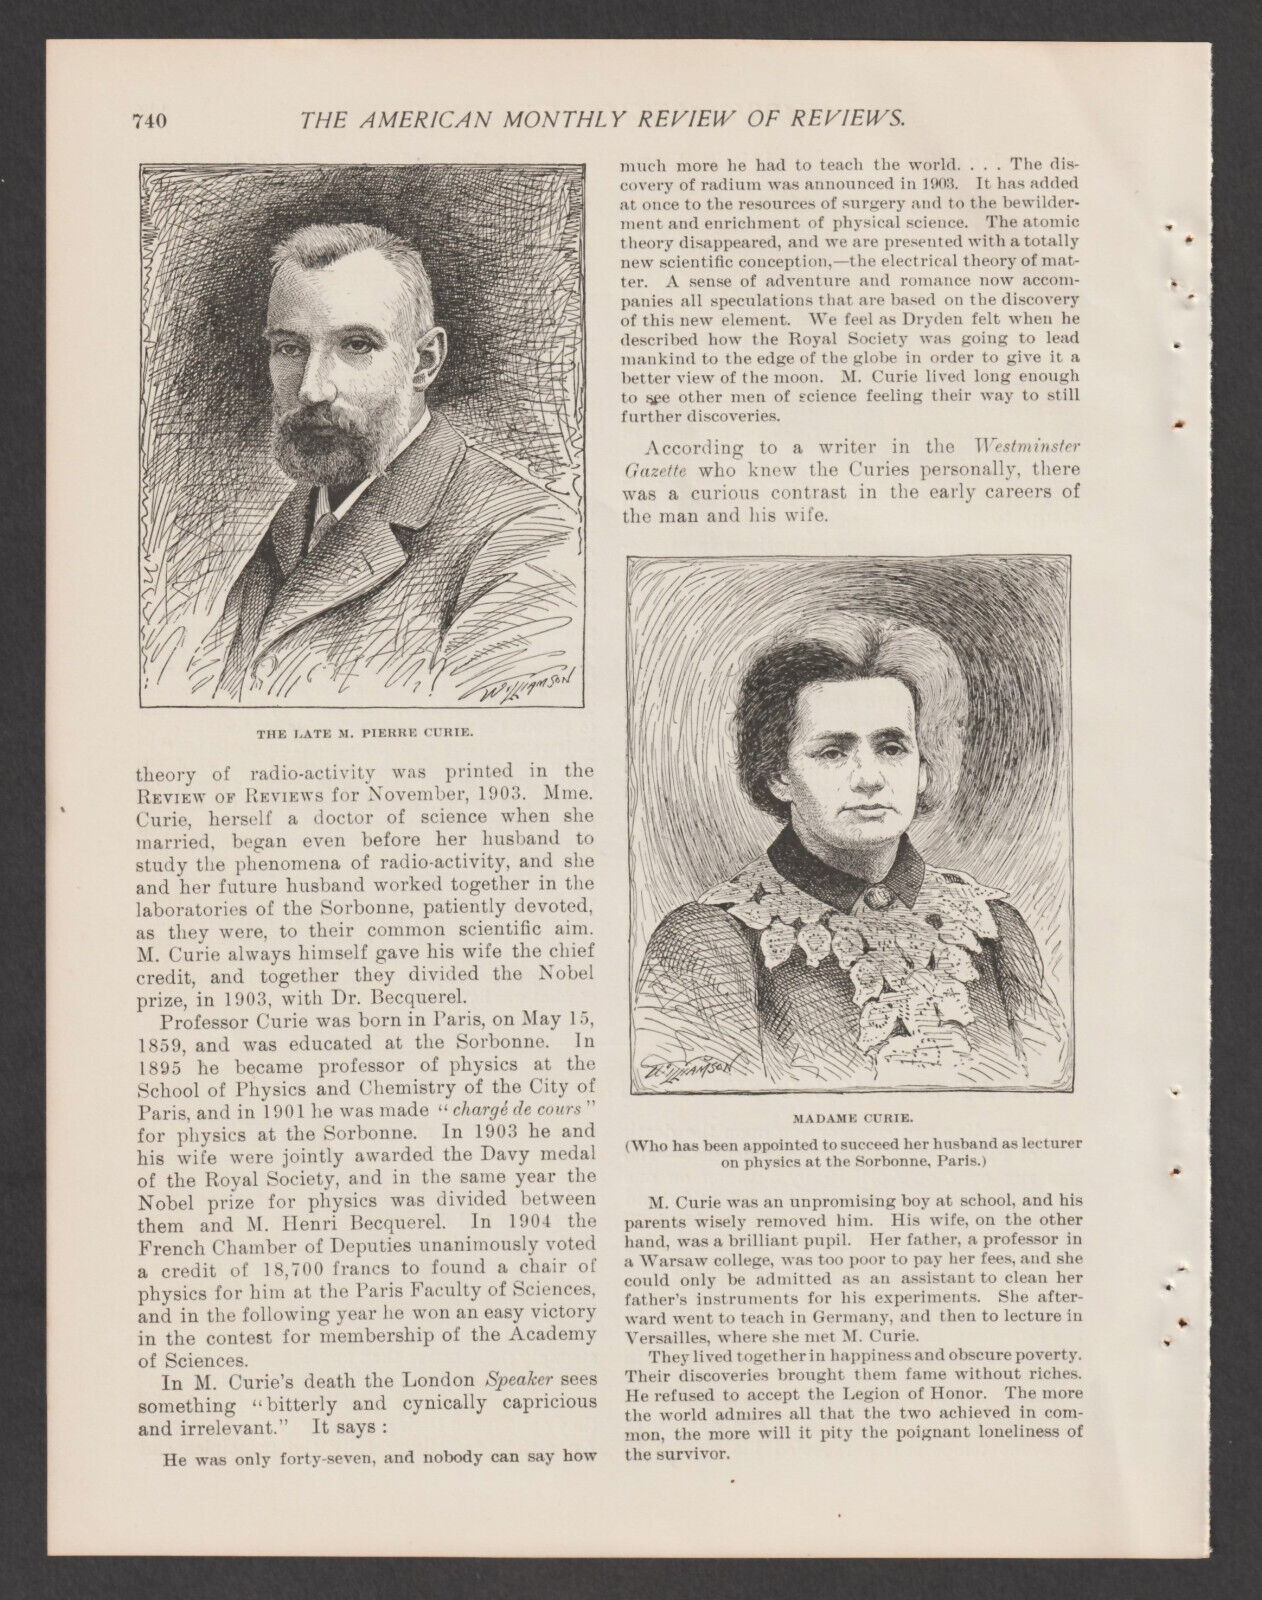 Pierre Curie Death and Marie Curie Appointed To Sorbonne 1906 Magazine Article